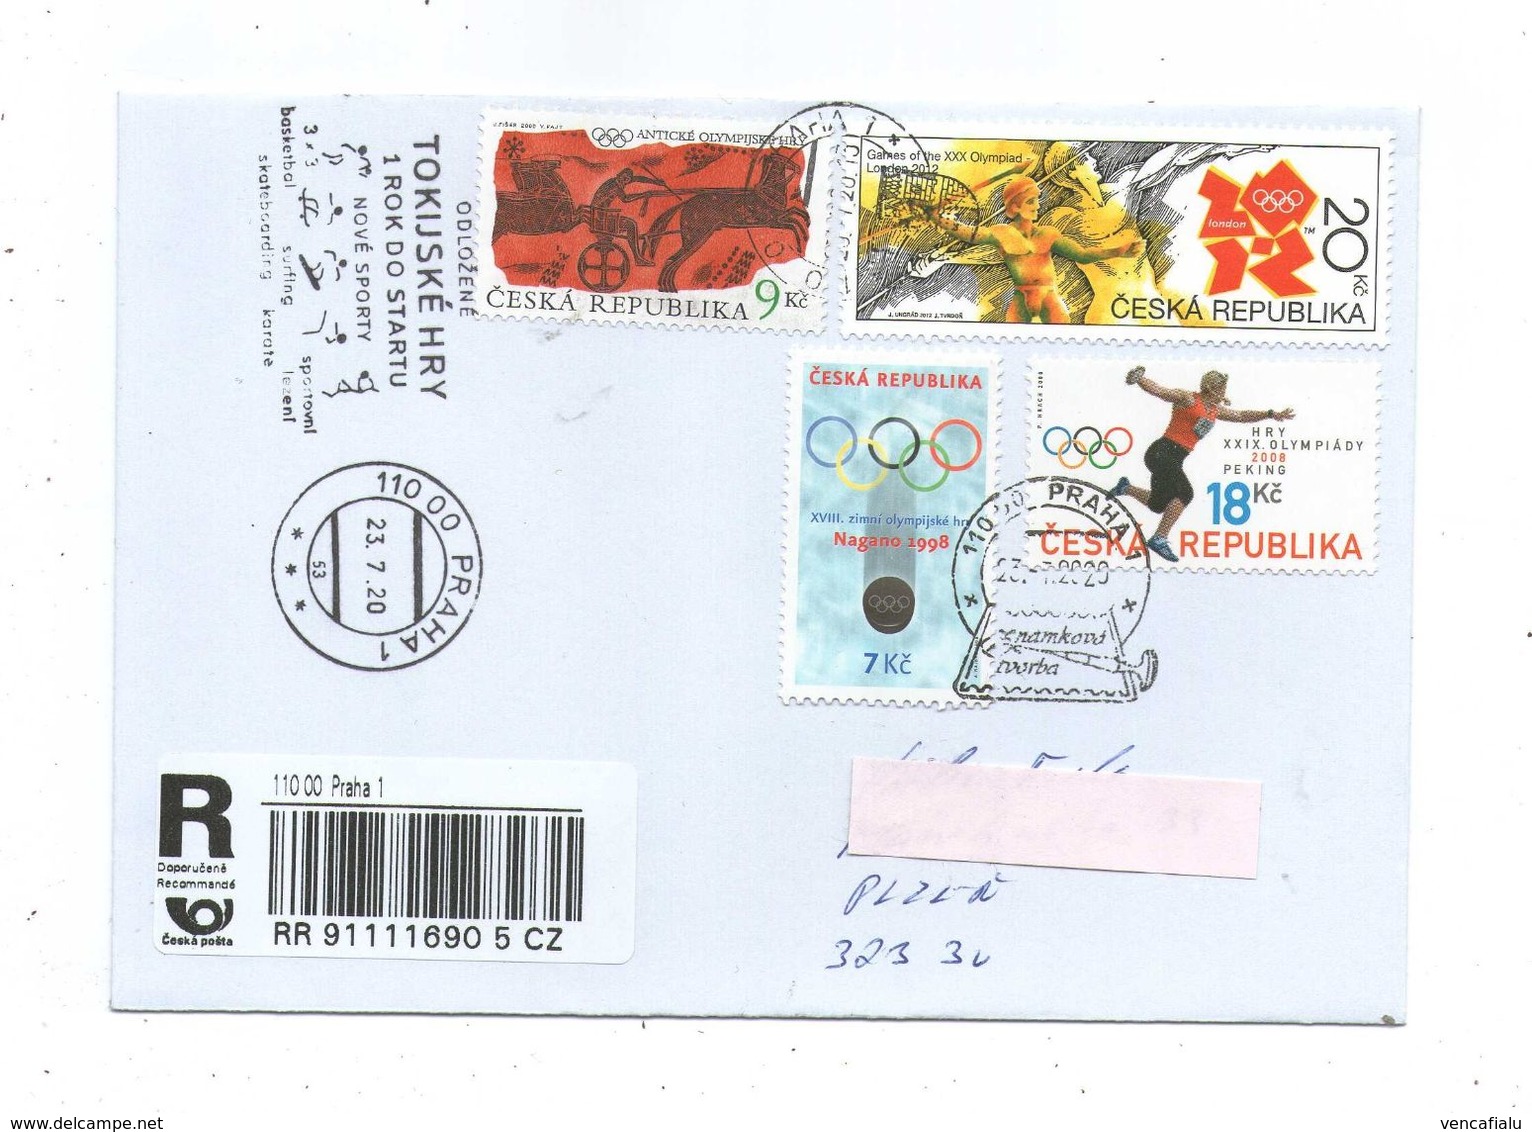 Czech Republic 2020 - Moving The Deadline By One Year, Special Postmark, Postage Registered Used, Nice Stamps - Sommer 2020: Tokio